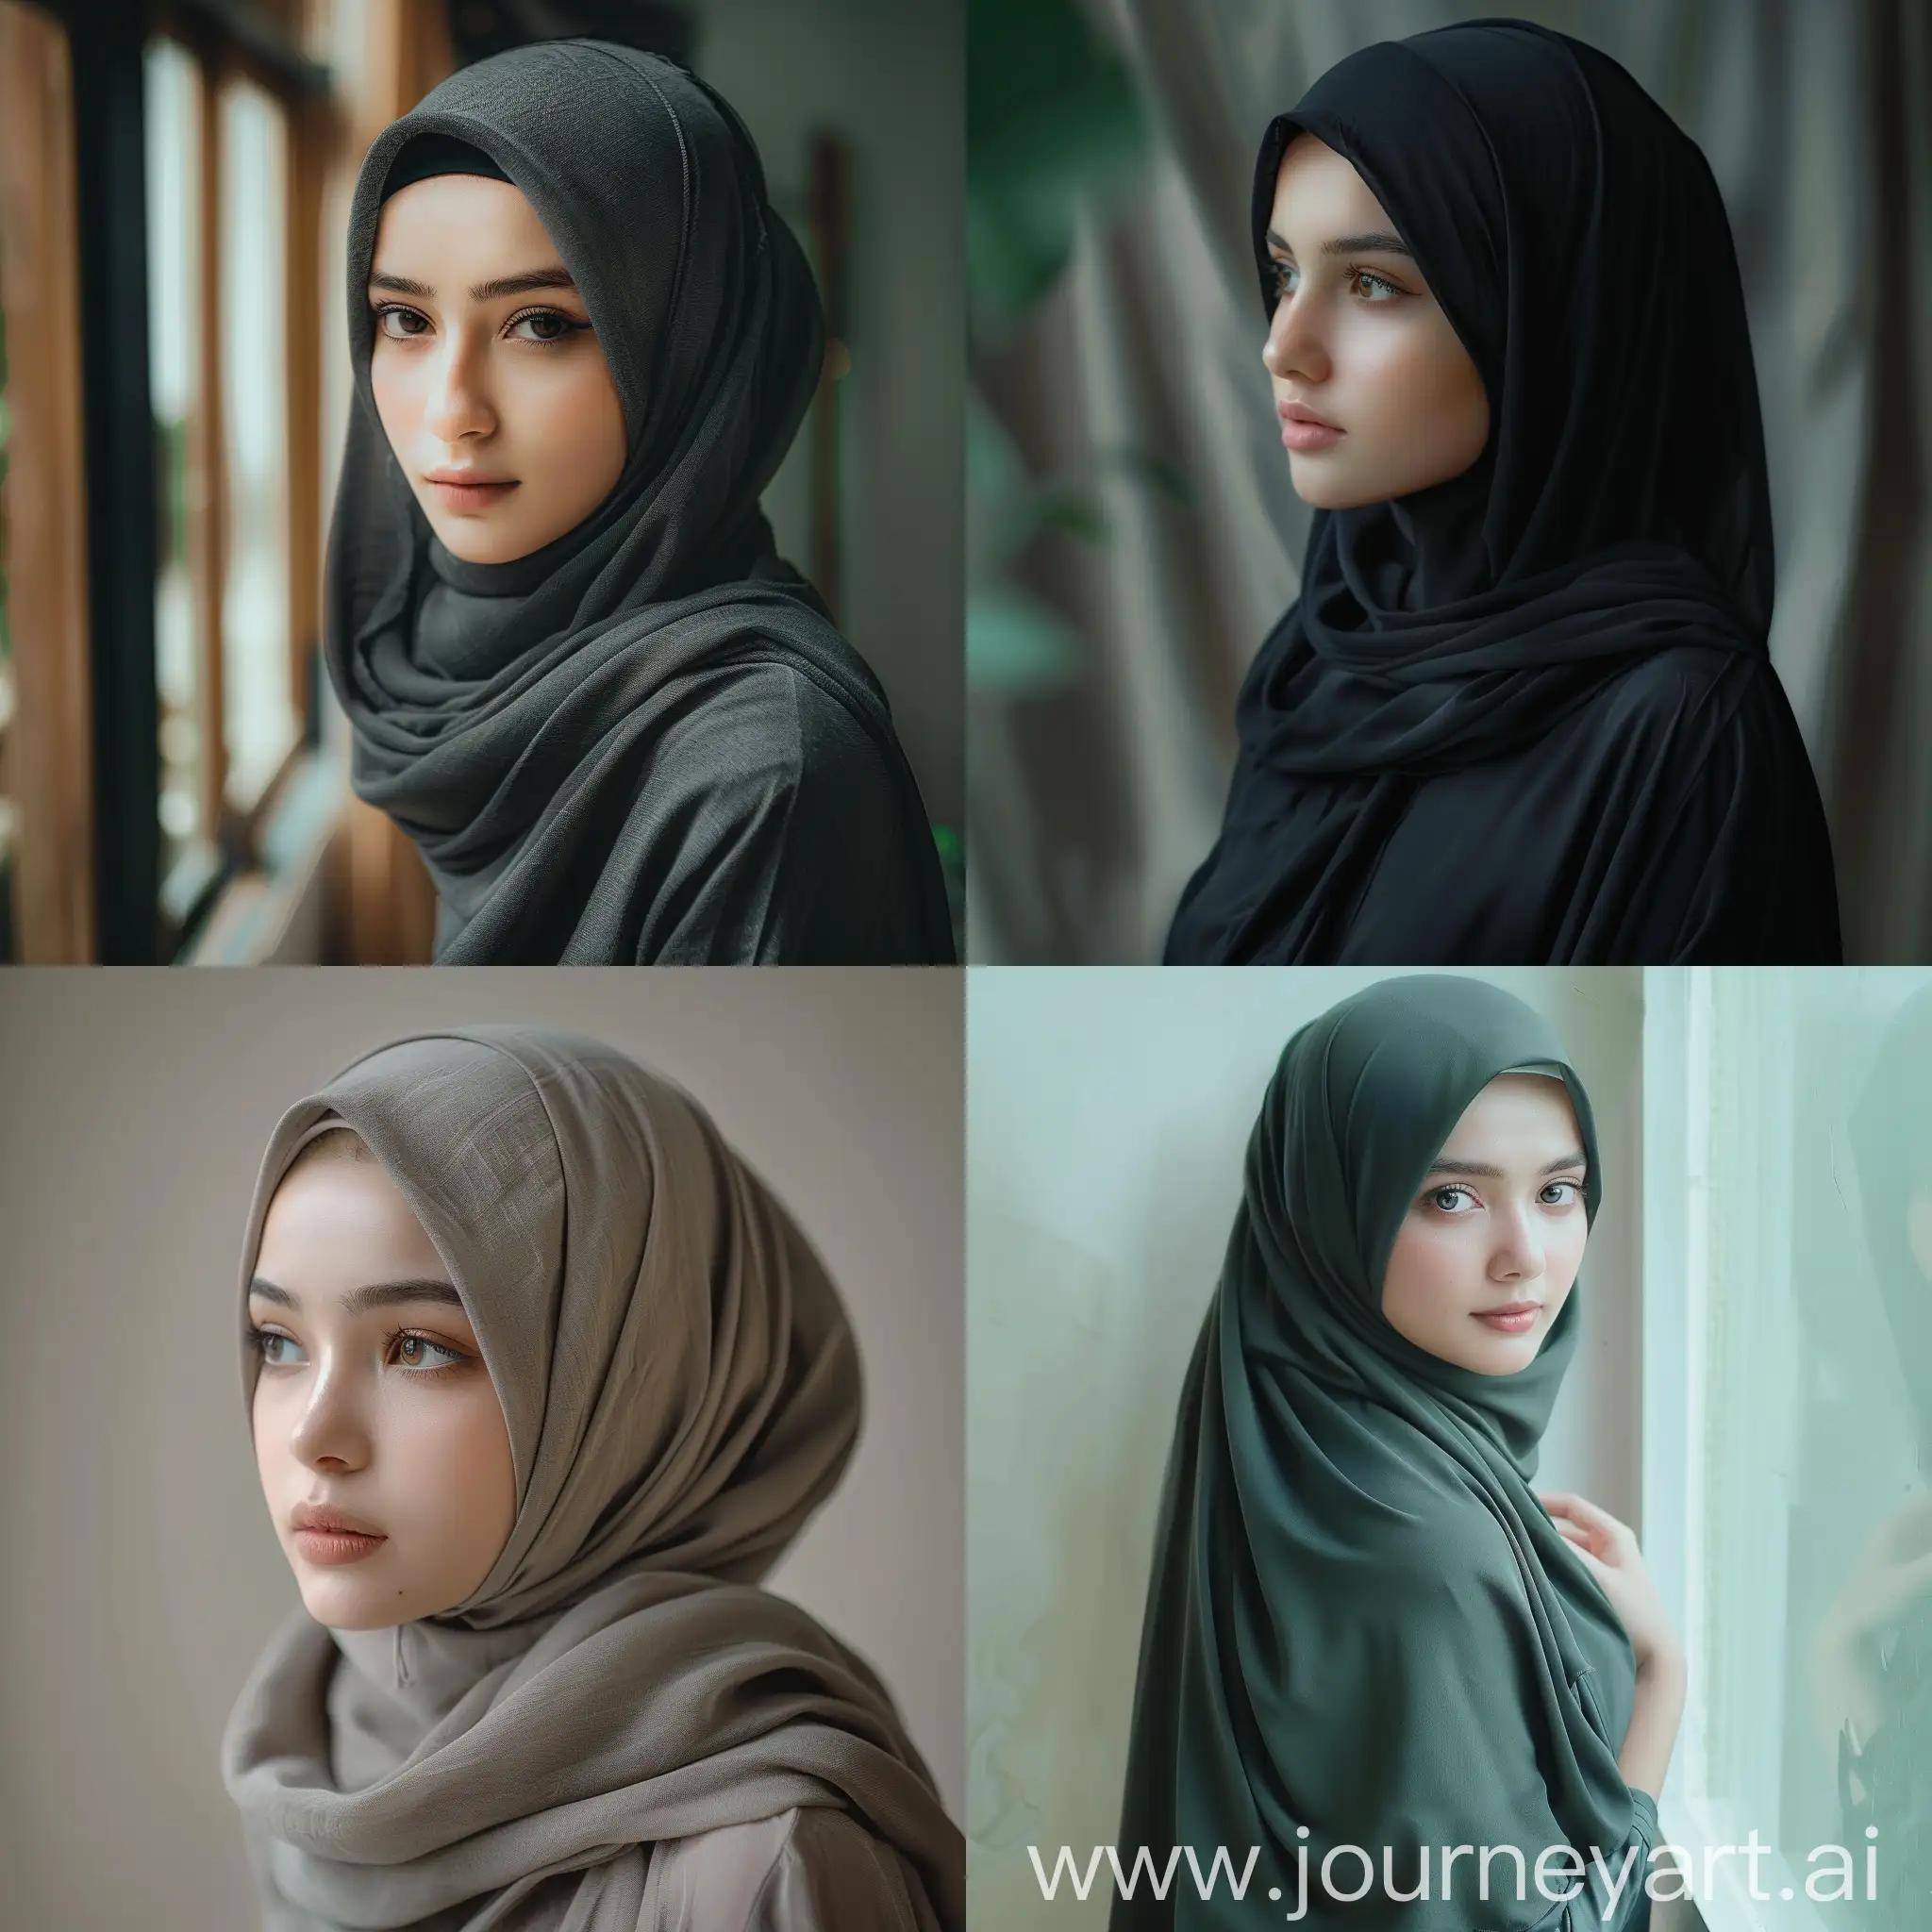 Full-Body-Portrait-of-an-Ideal-Skinny-18YearOld-Indonesian-Hijab-Girl-in-High-Definition-Photography